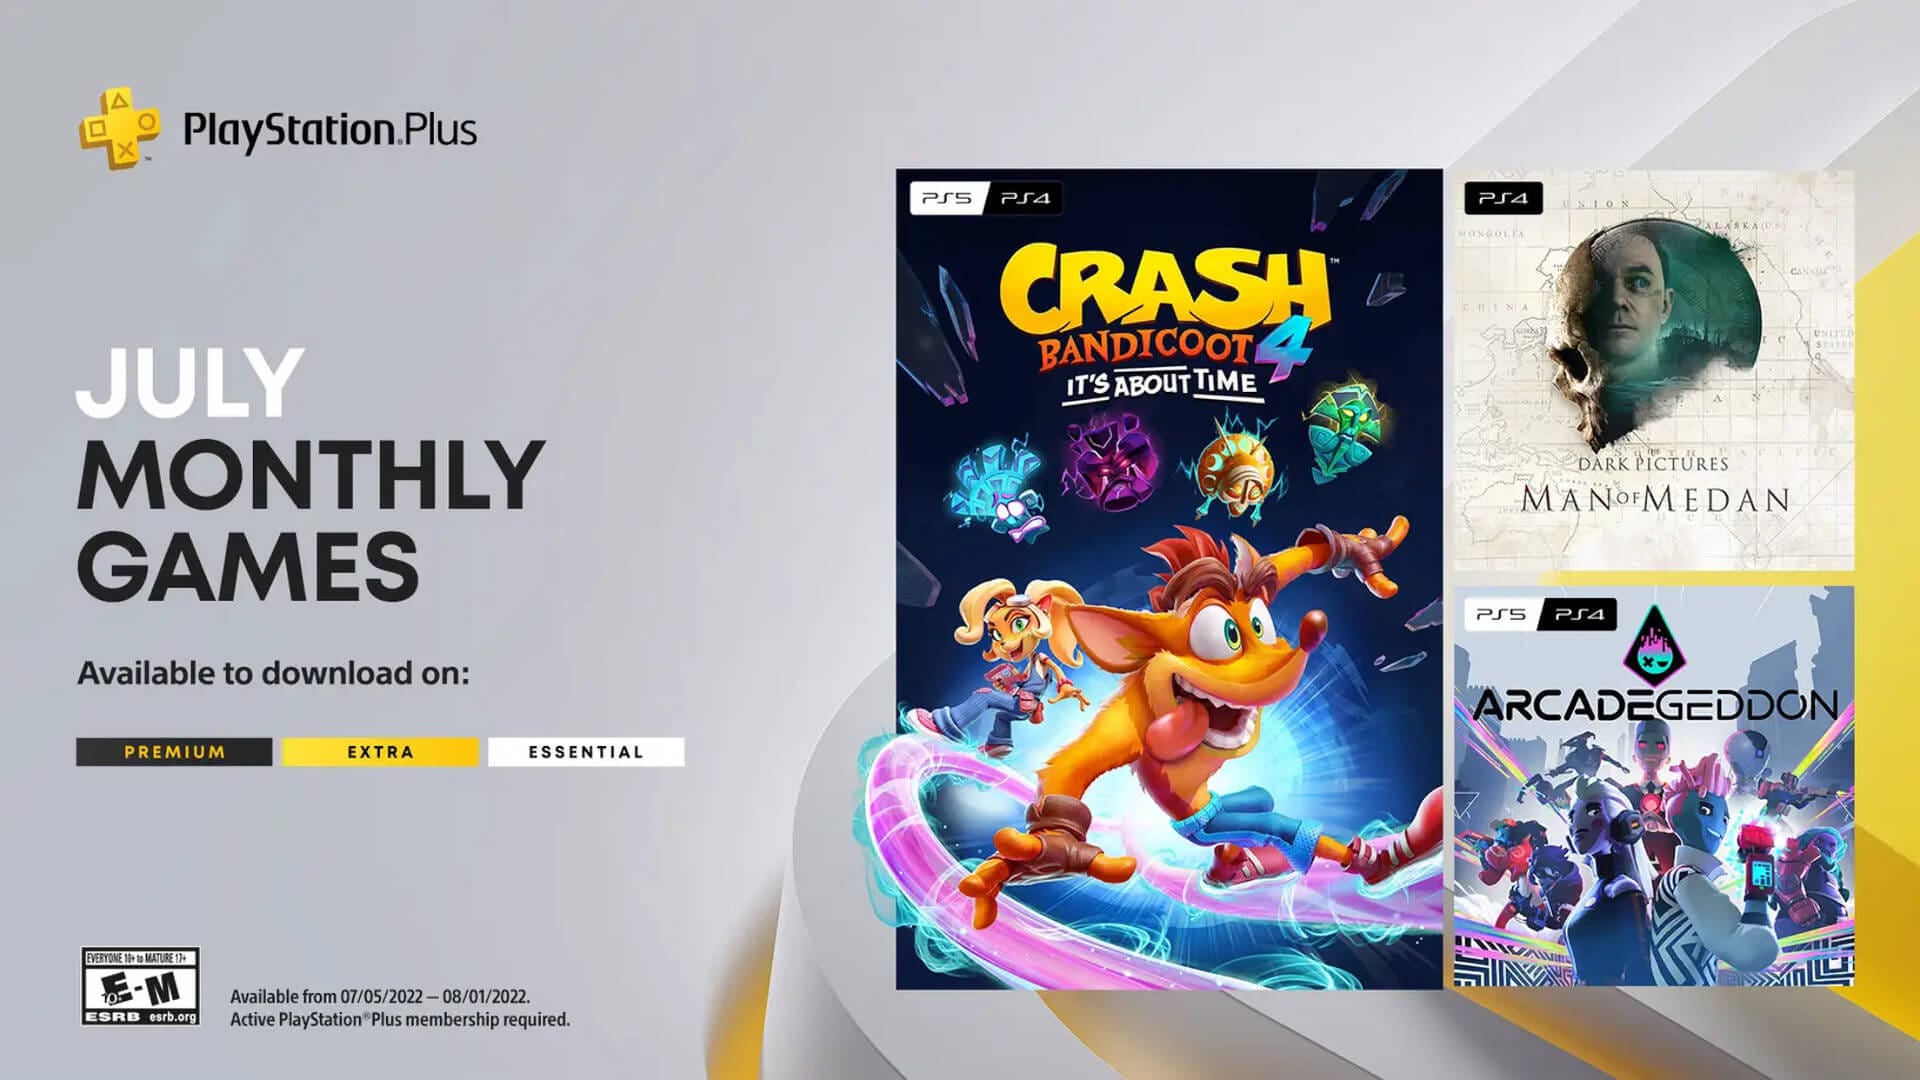 PlayStation Plus Essential July Games Crash The Party